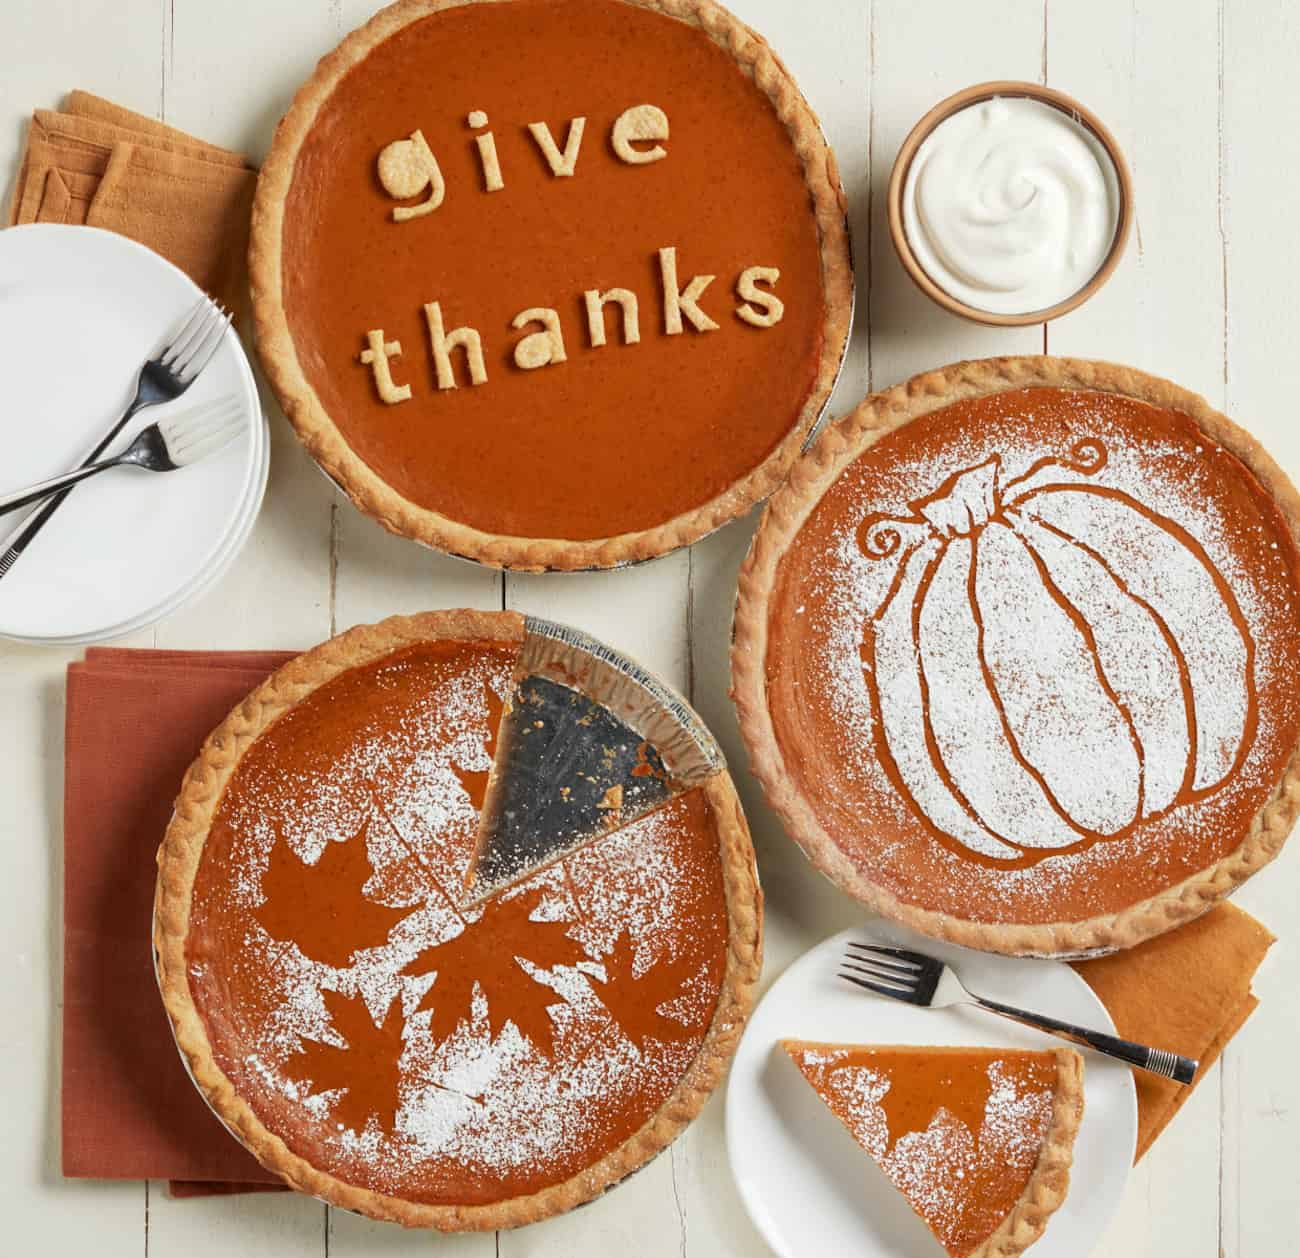 pumpkin pie with Give Thanks and powdered sugar on pie